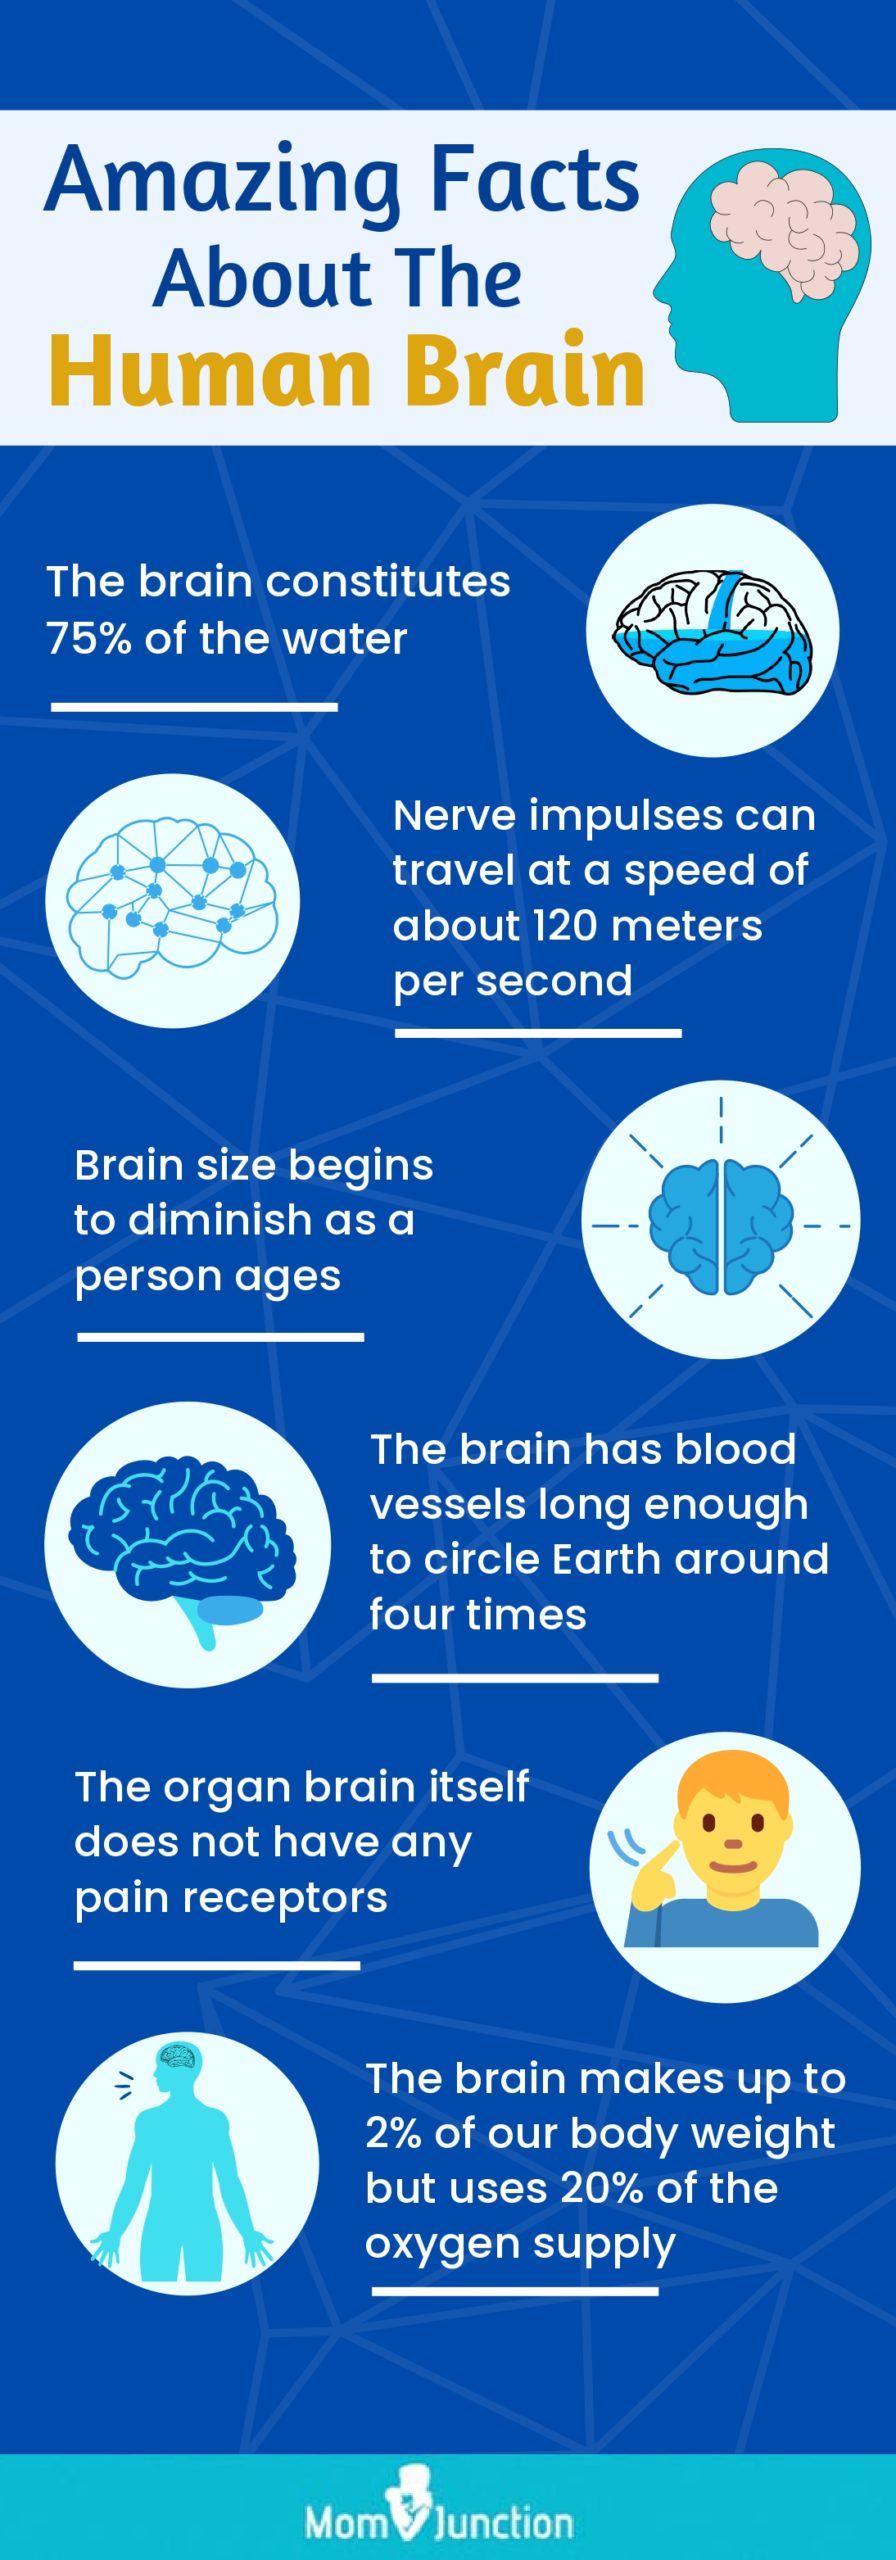 amazing facts about the human brain (infographic)